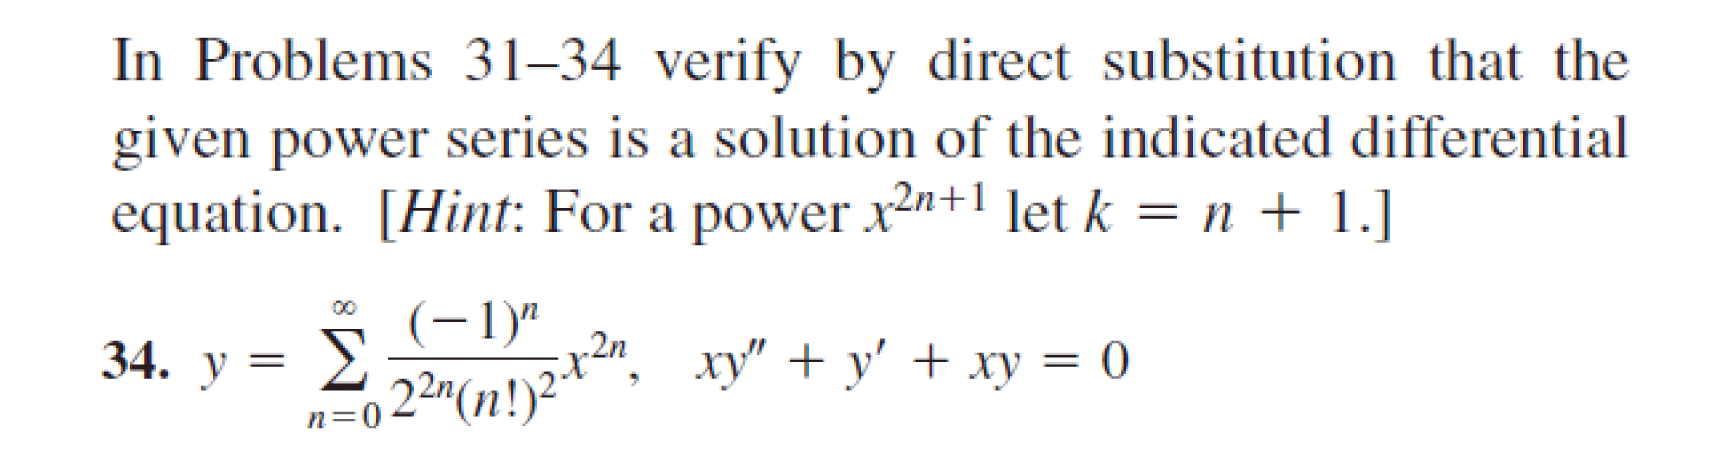 In Problems 31–34 verify by direct substitution that the
given power series is a solution of the indicated differential
equation. [Hint: For a power x2n+1 let k = n + 1.]
